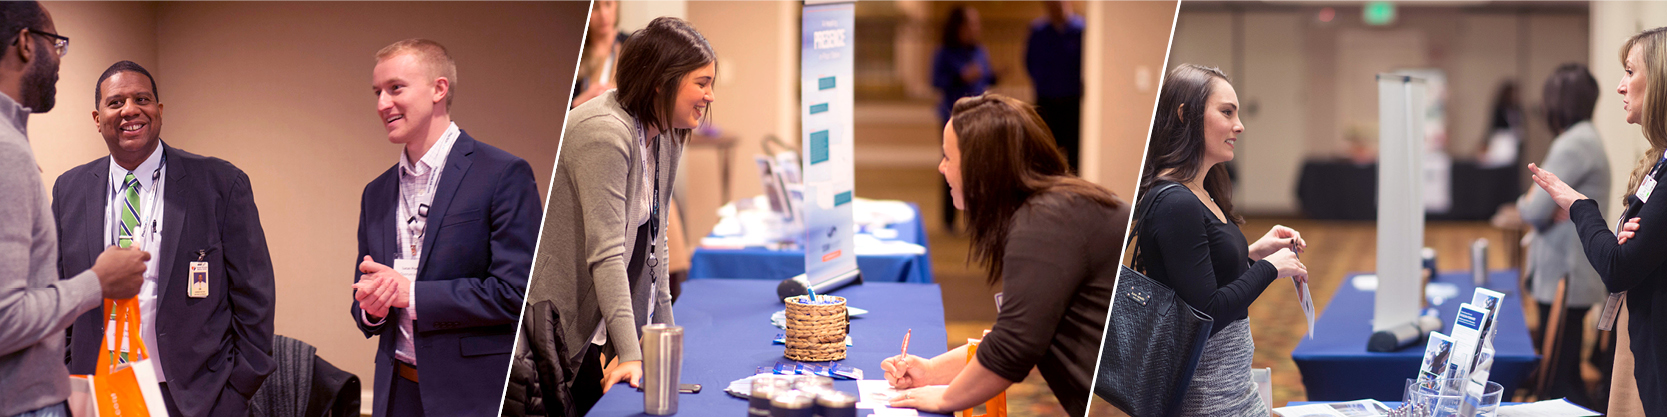 Physician recruiters networking with physicians at a career fair